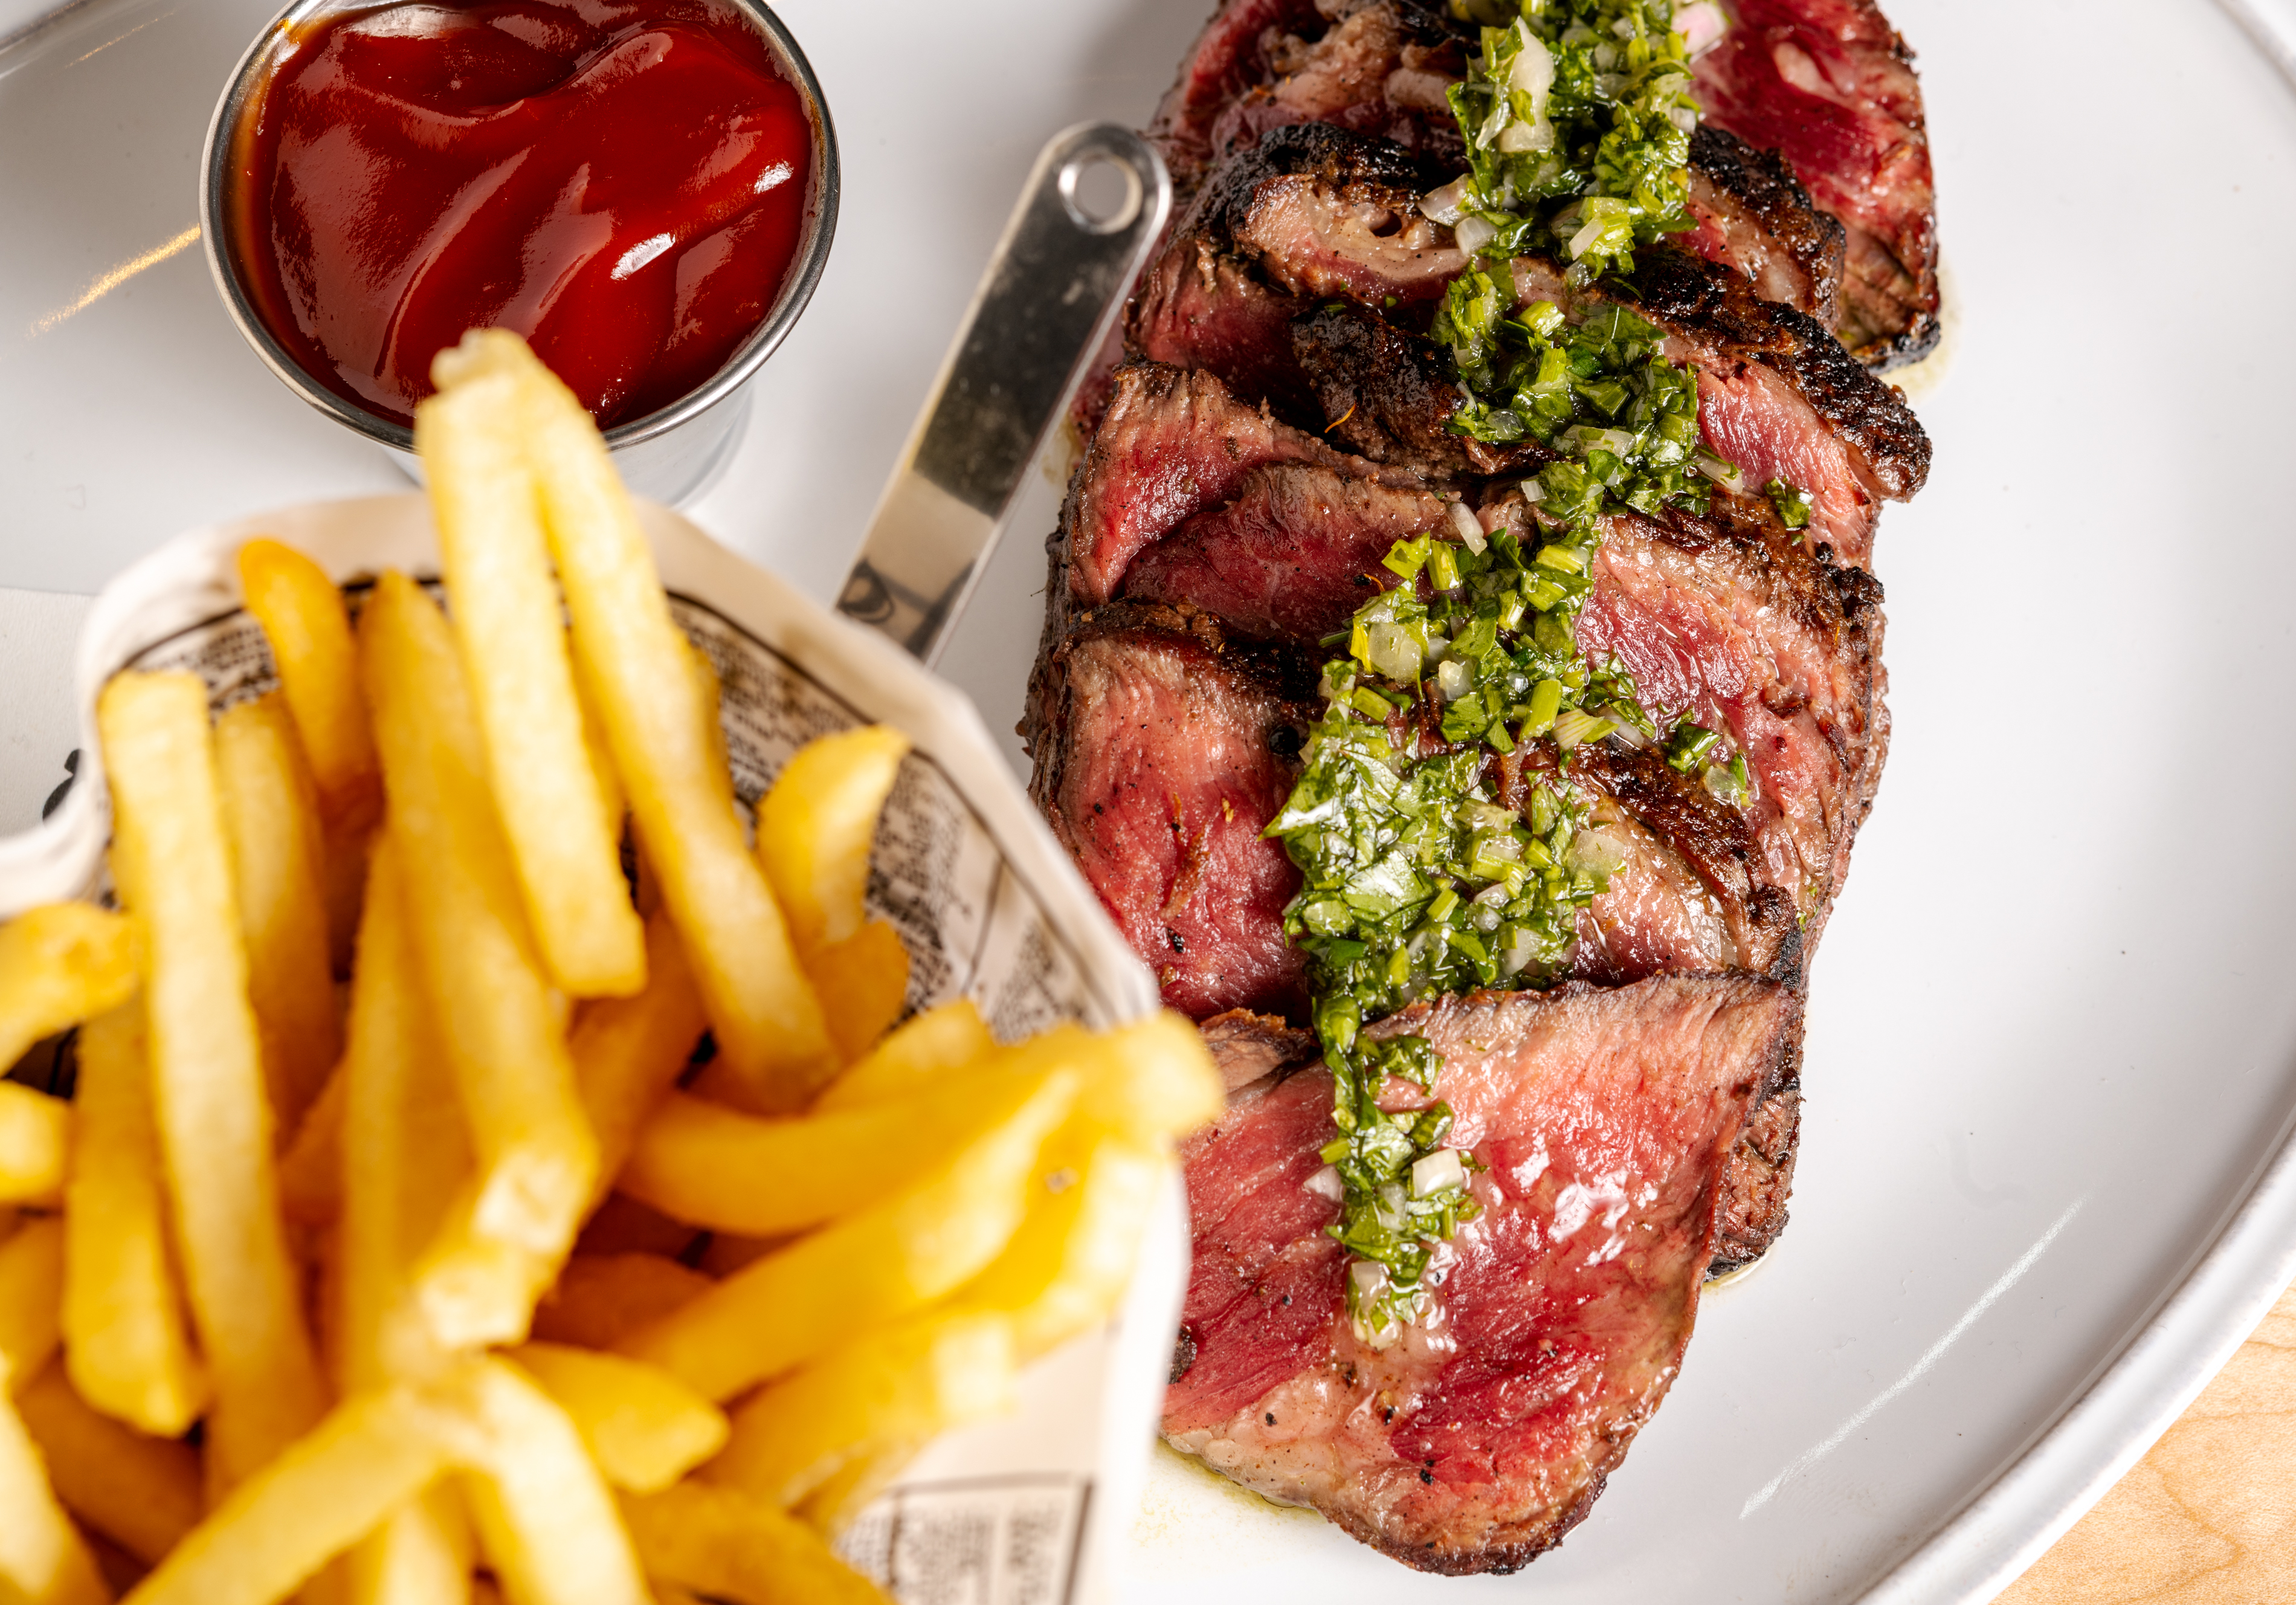 A strip steak sliced up with fries and ketchup to dip.